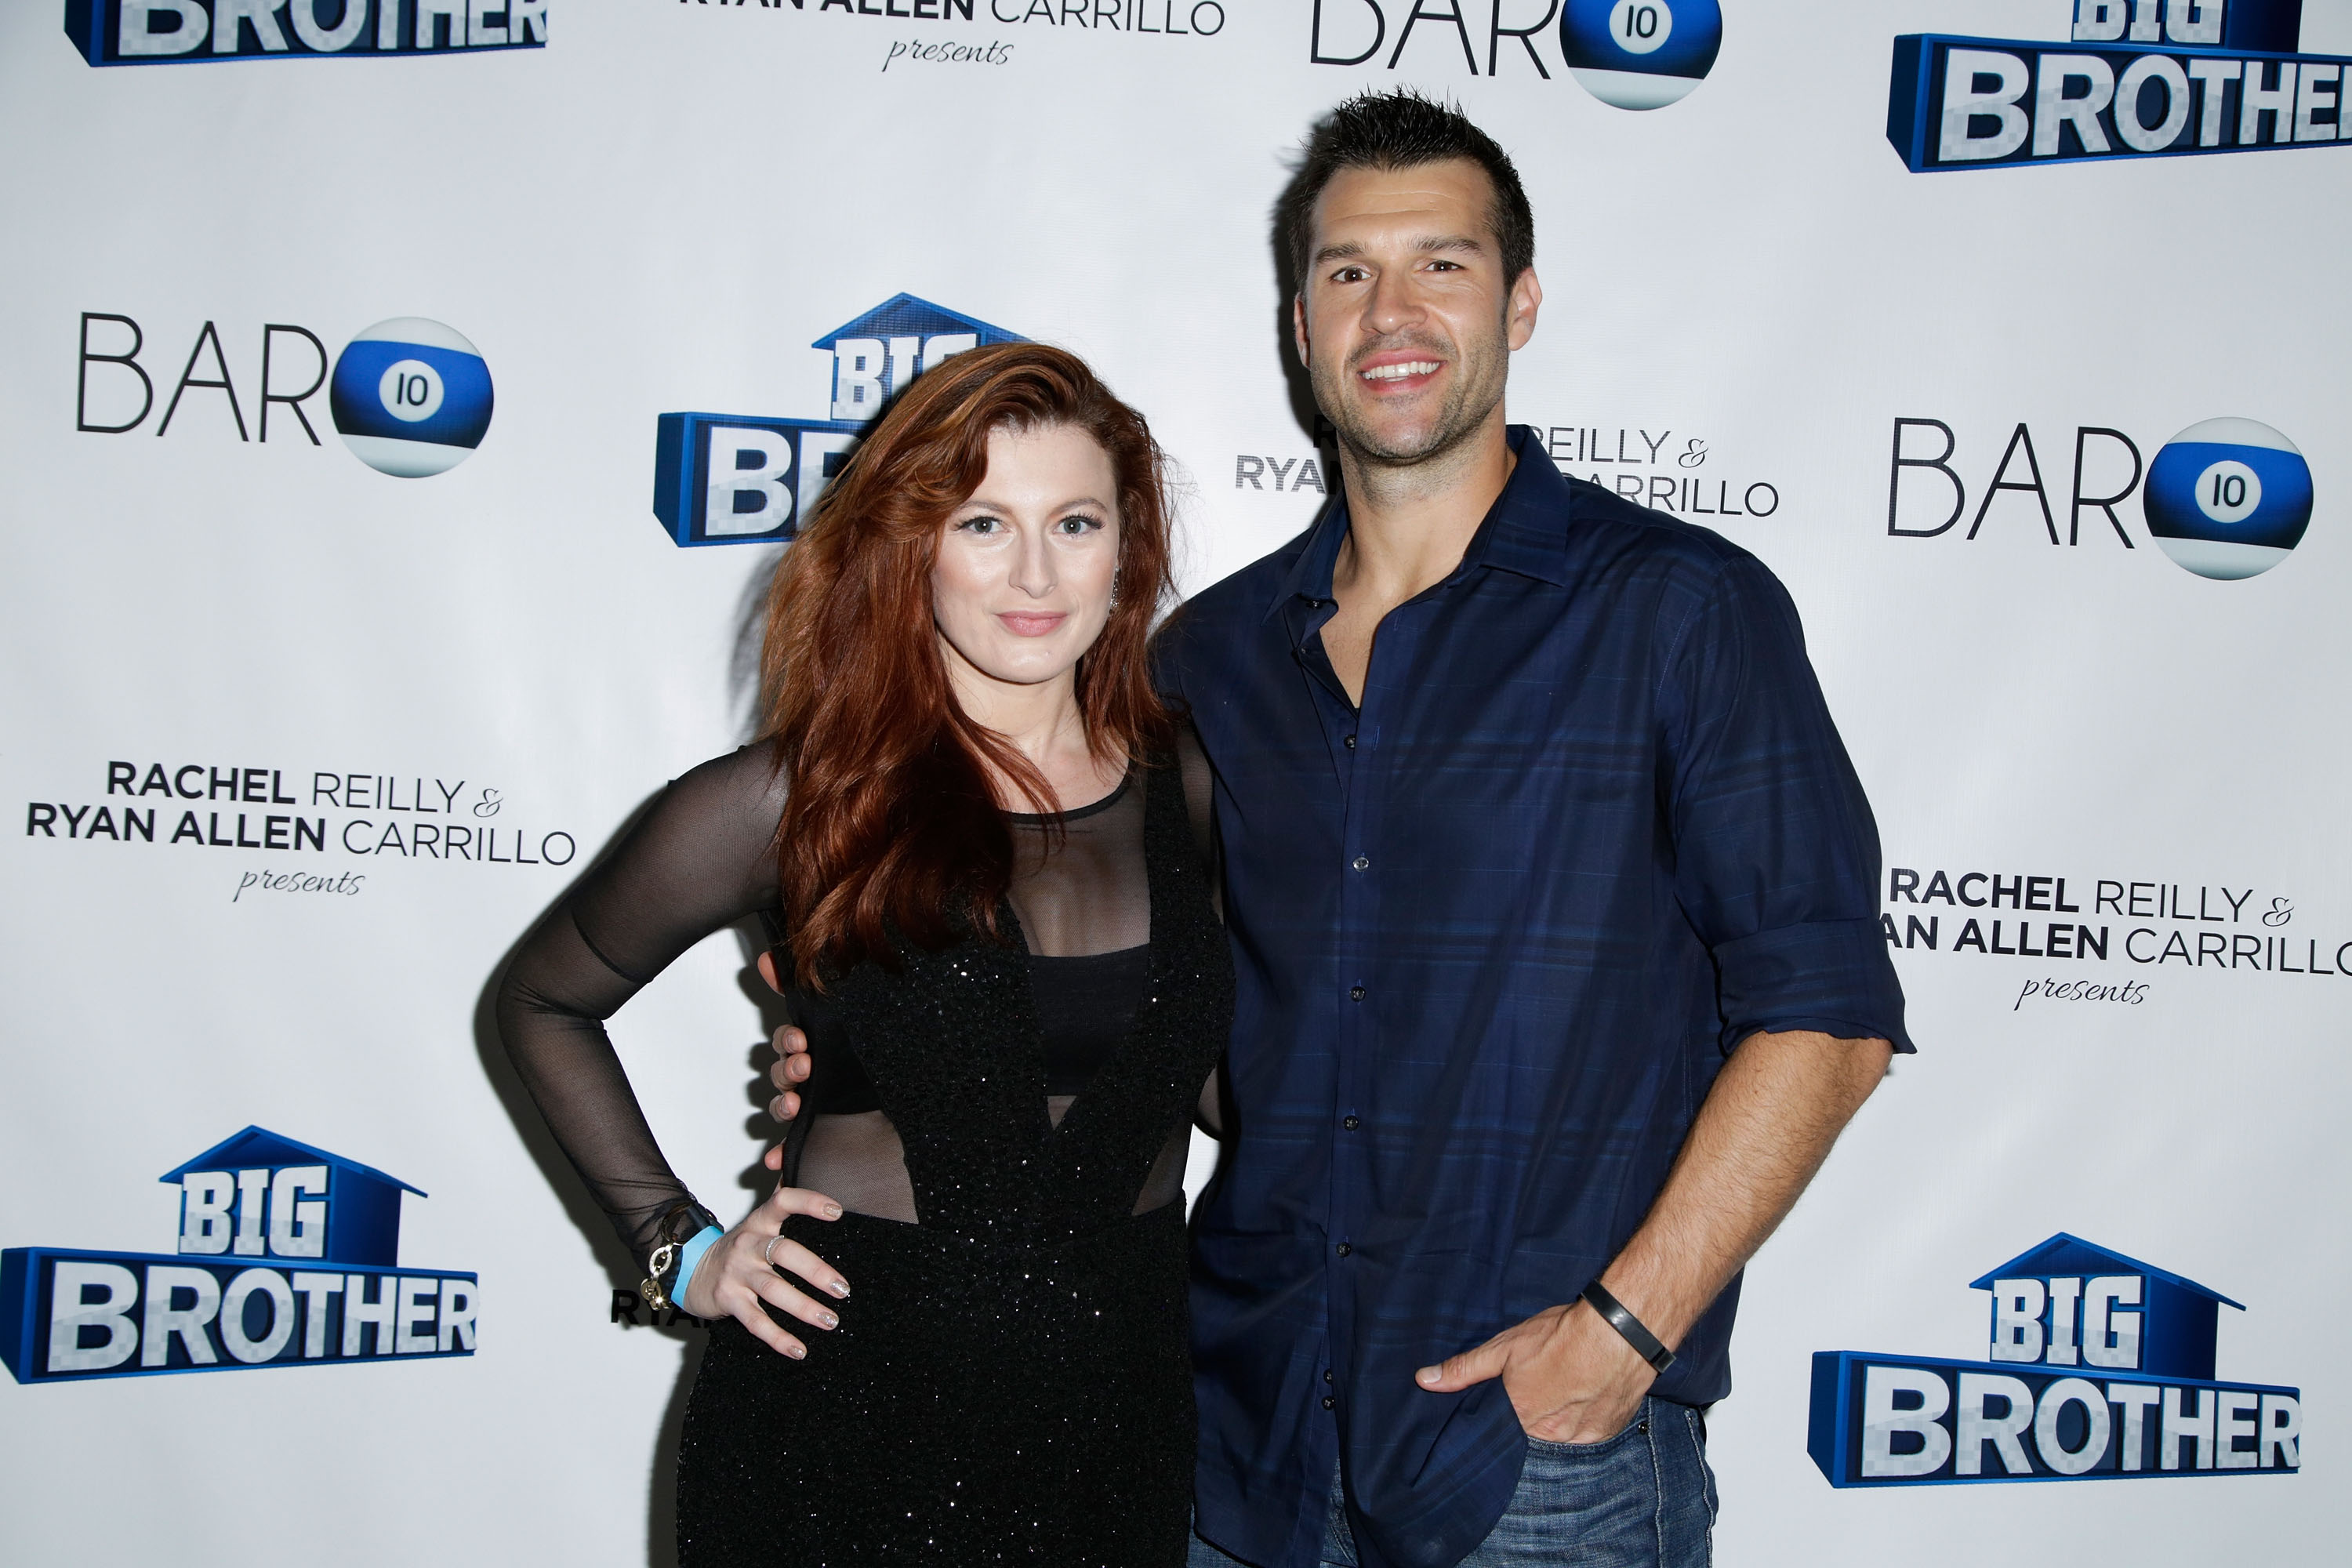 TV personalities Rachel Reilly (L) and Brendon Villegas attend CBS's "Big Brother Season 17" cast party